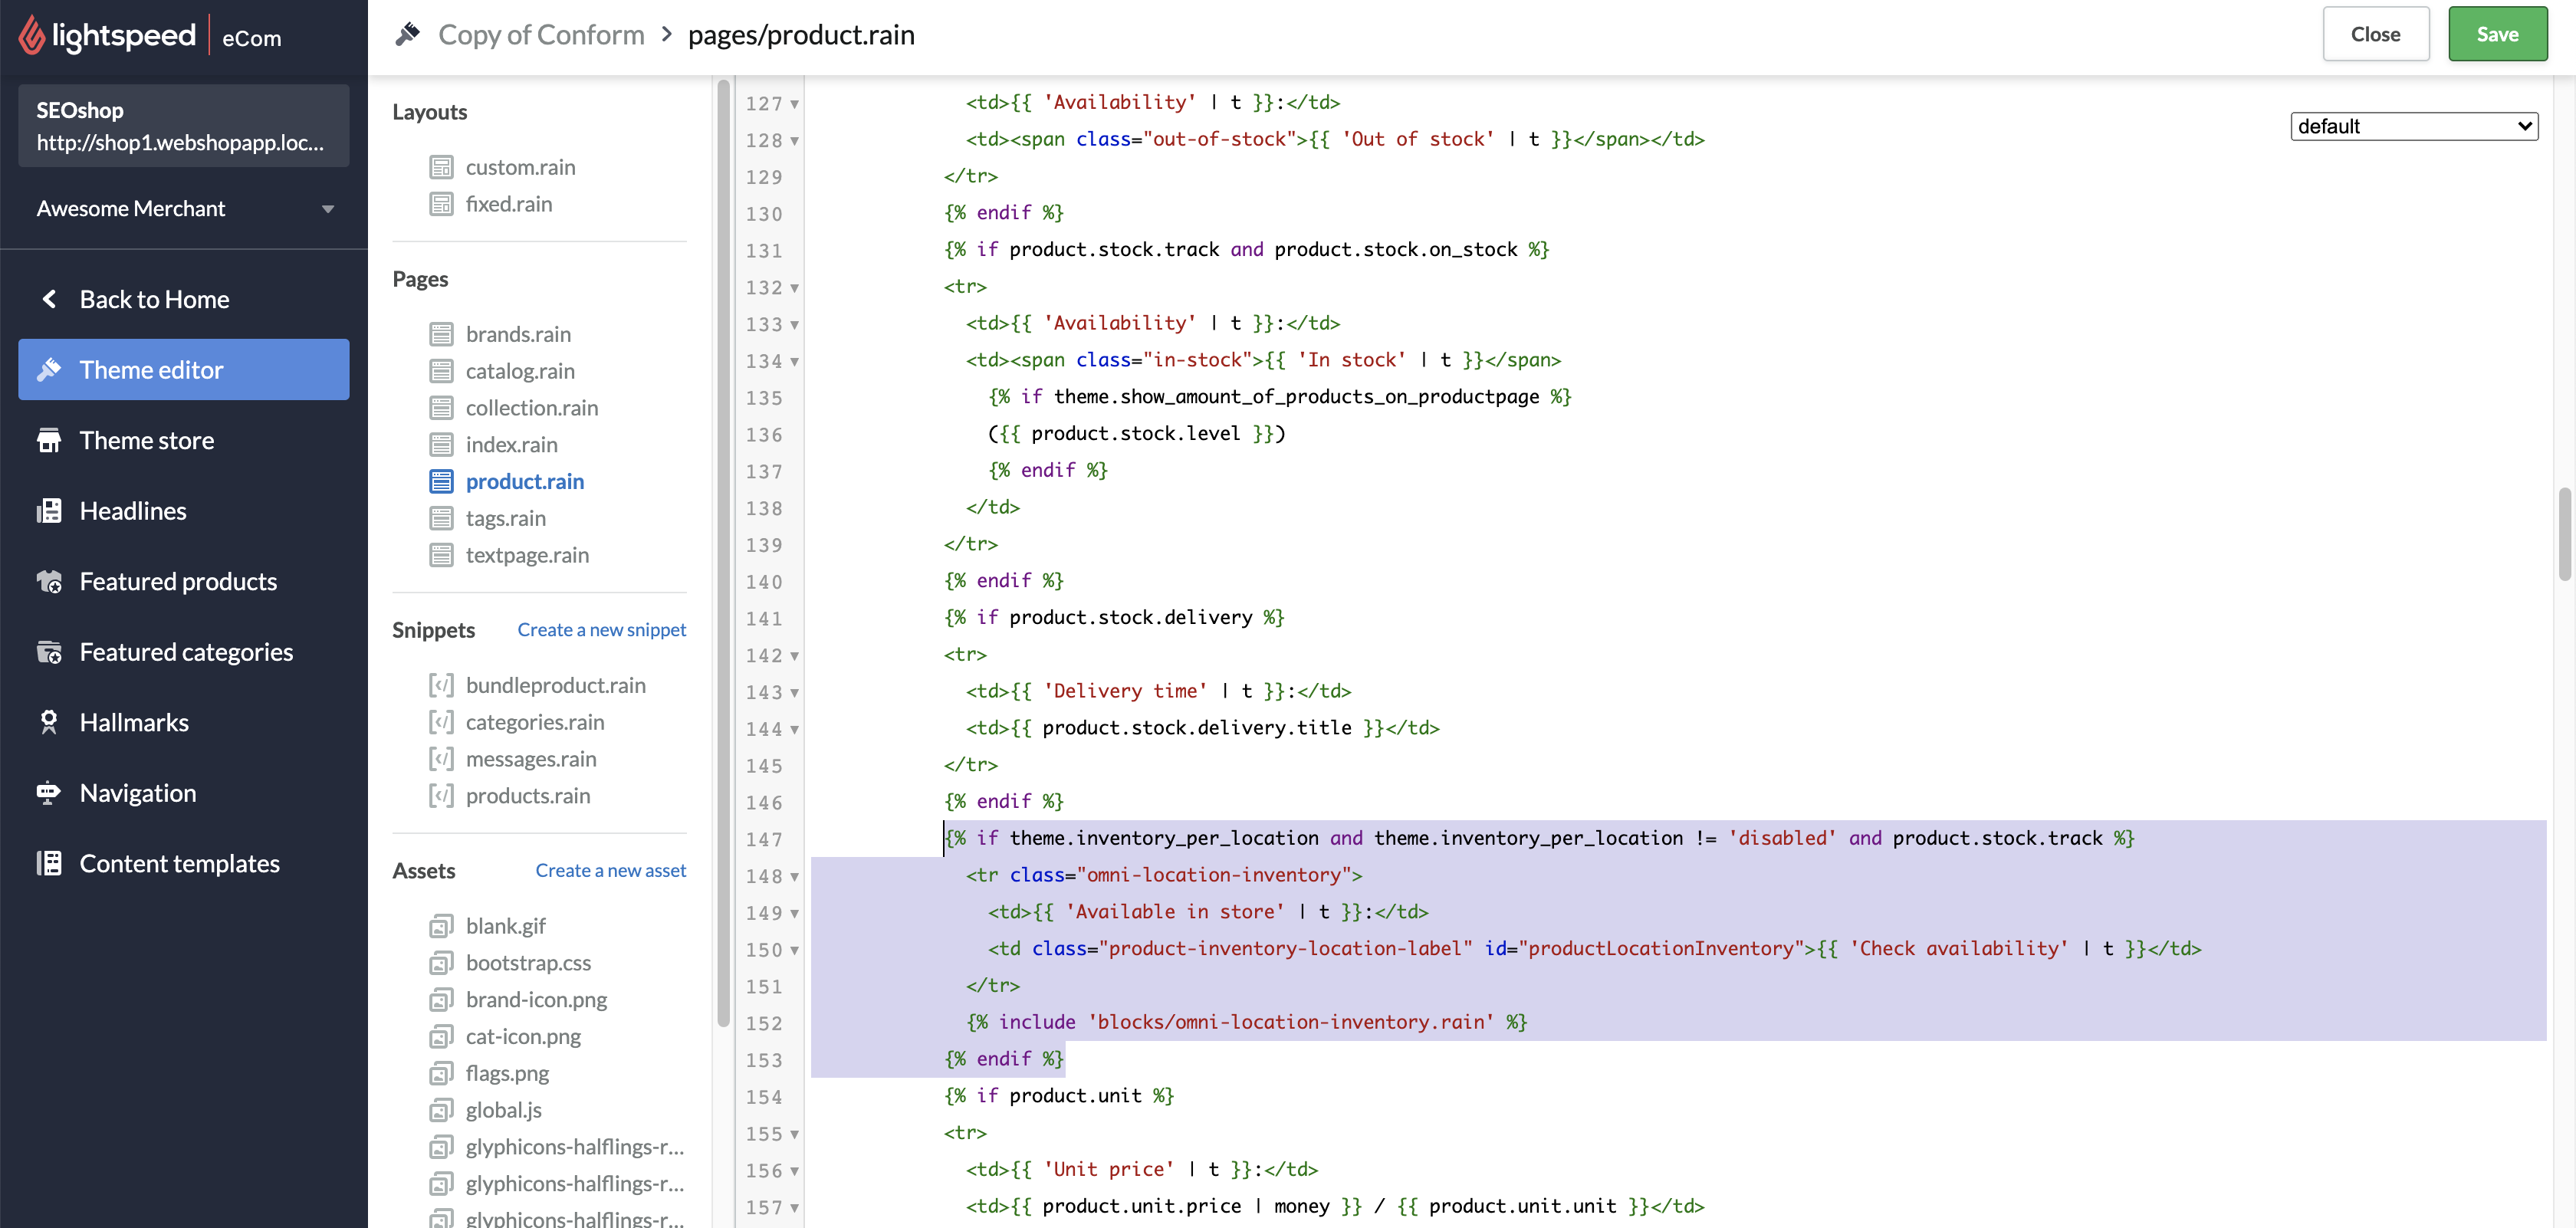 Image: Shows an example of where to add the code you need to enter.